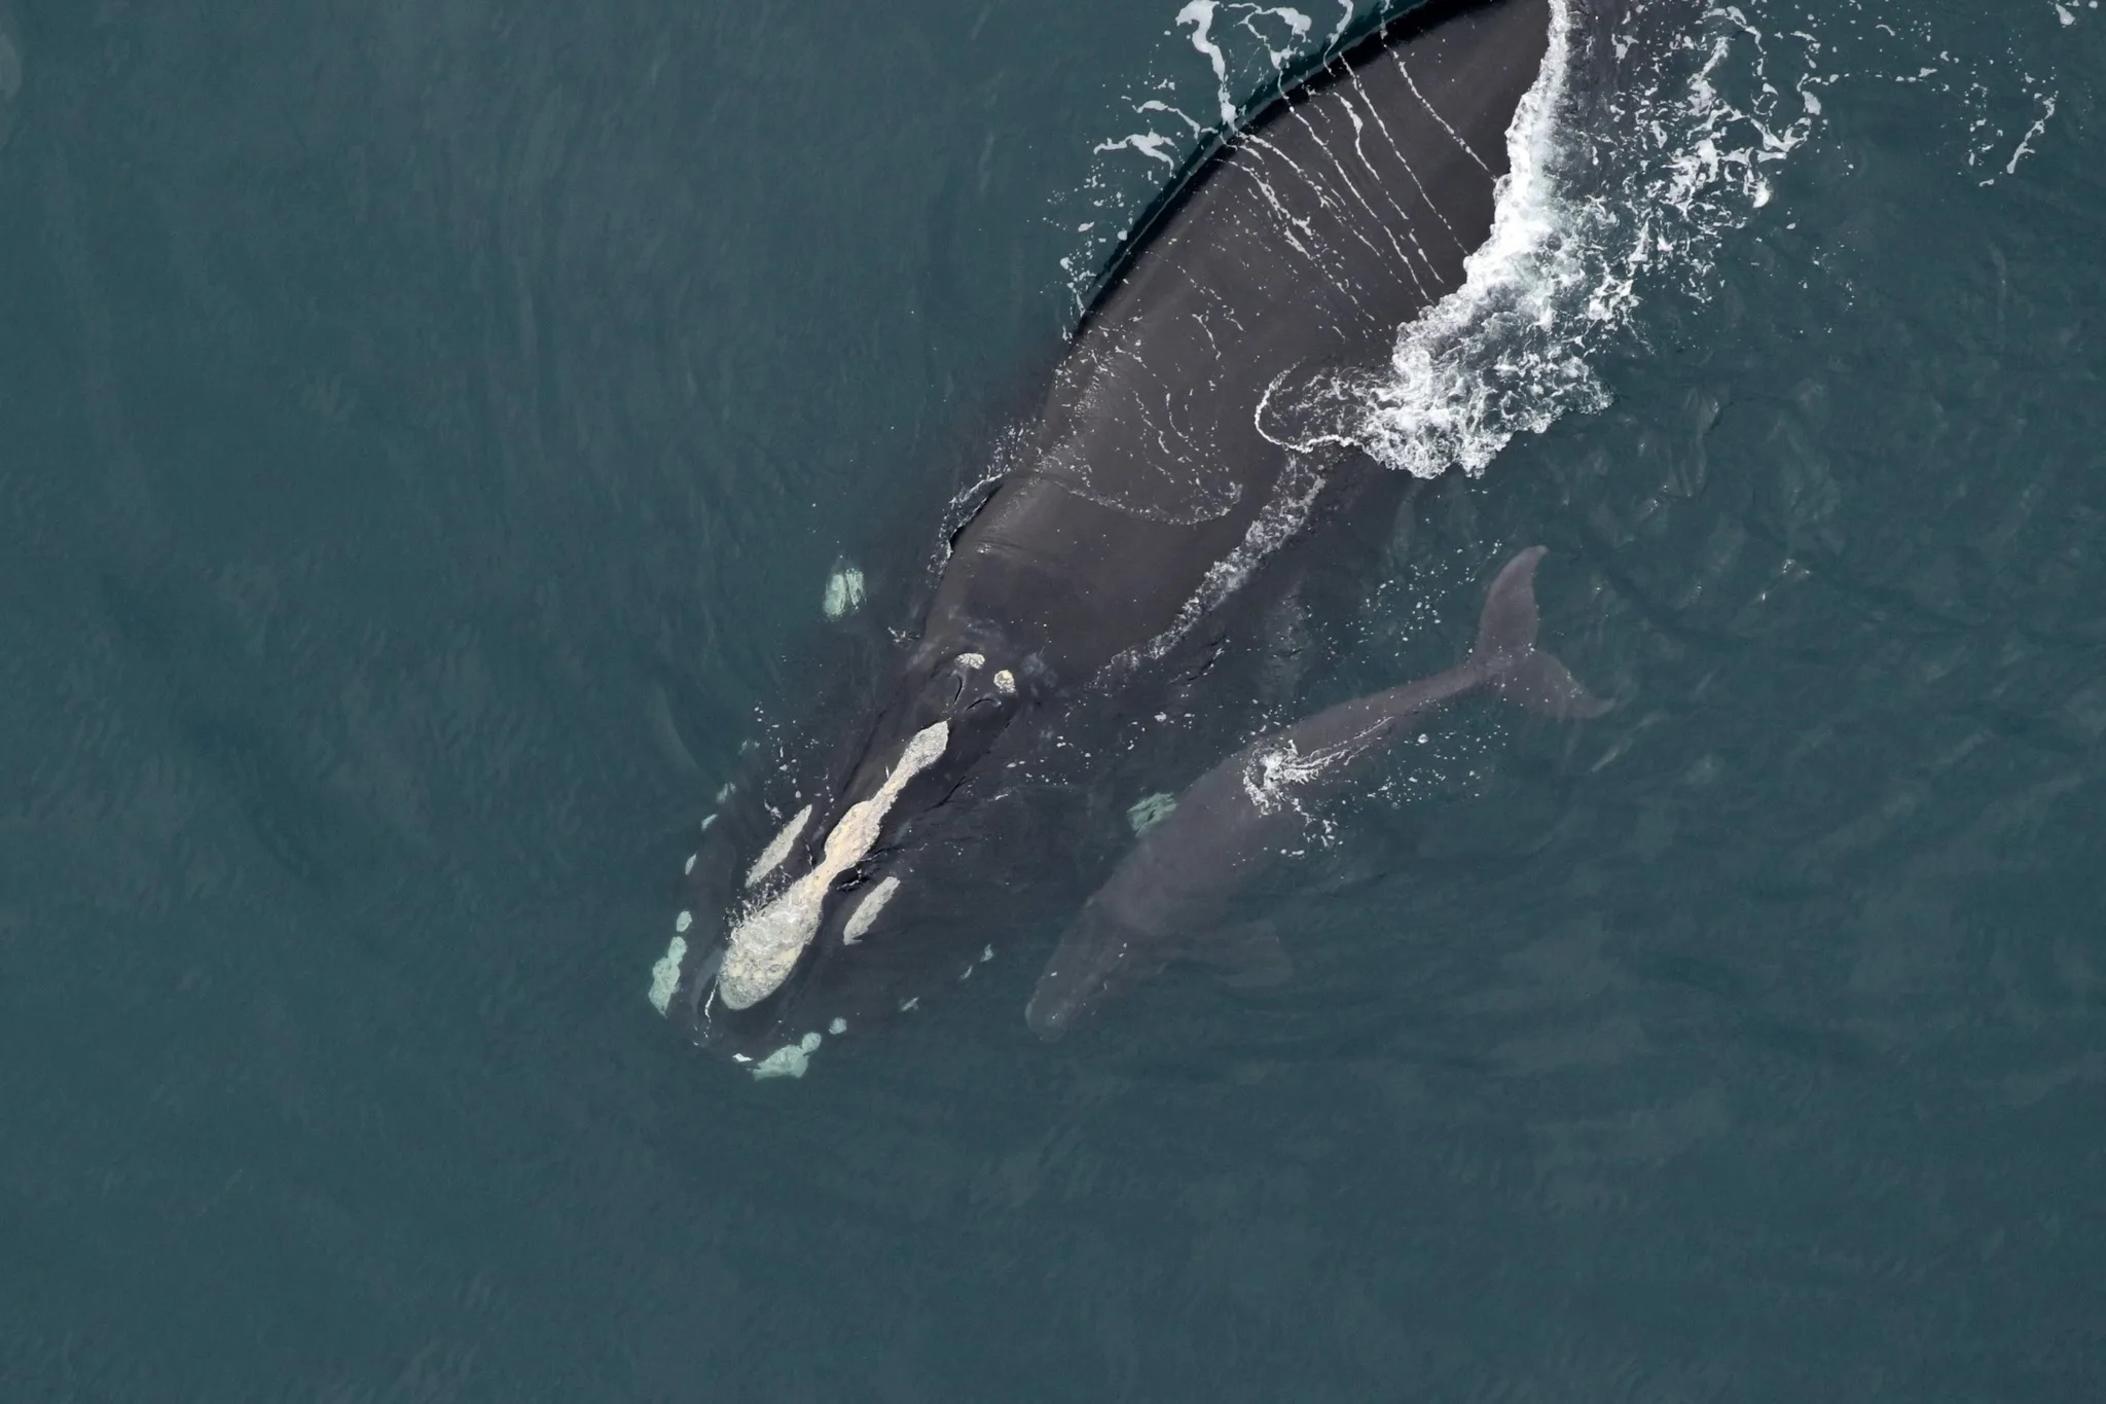 Right whale Catalog #3260 ‘Skittle’ and calf sighted approximately 25 nautical miles off Kure Beach, NC on Feb. 16, 2024. Credit: Clearwater Marine Aquarium Research Institute, taken under NOAA permit #26919. Funded by US Army Corps of Engineers.